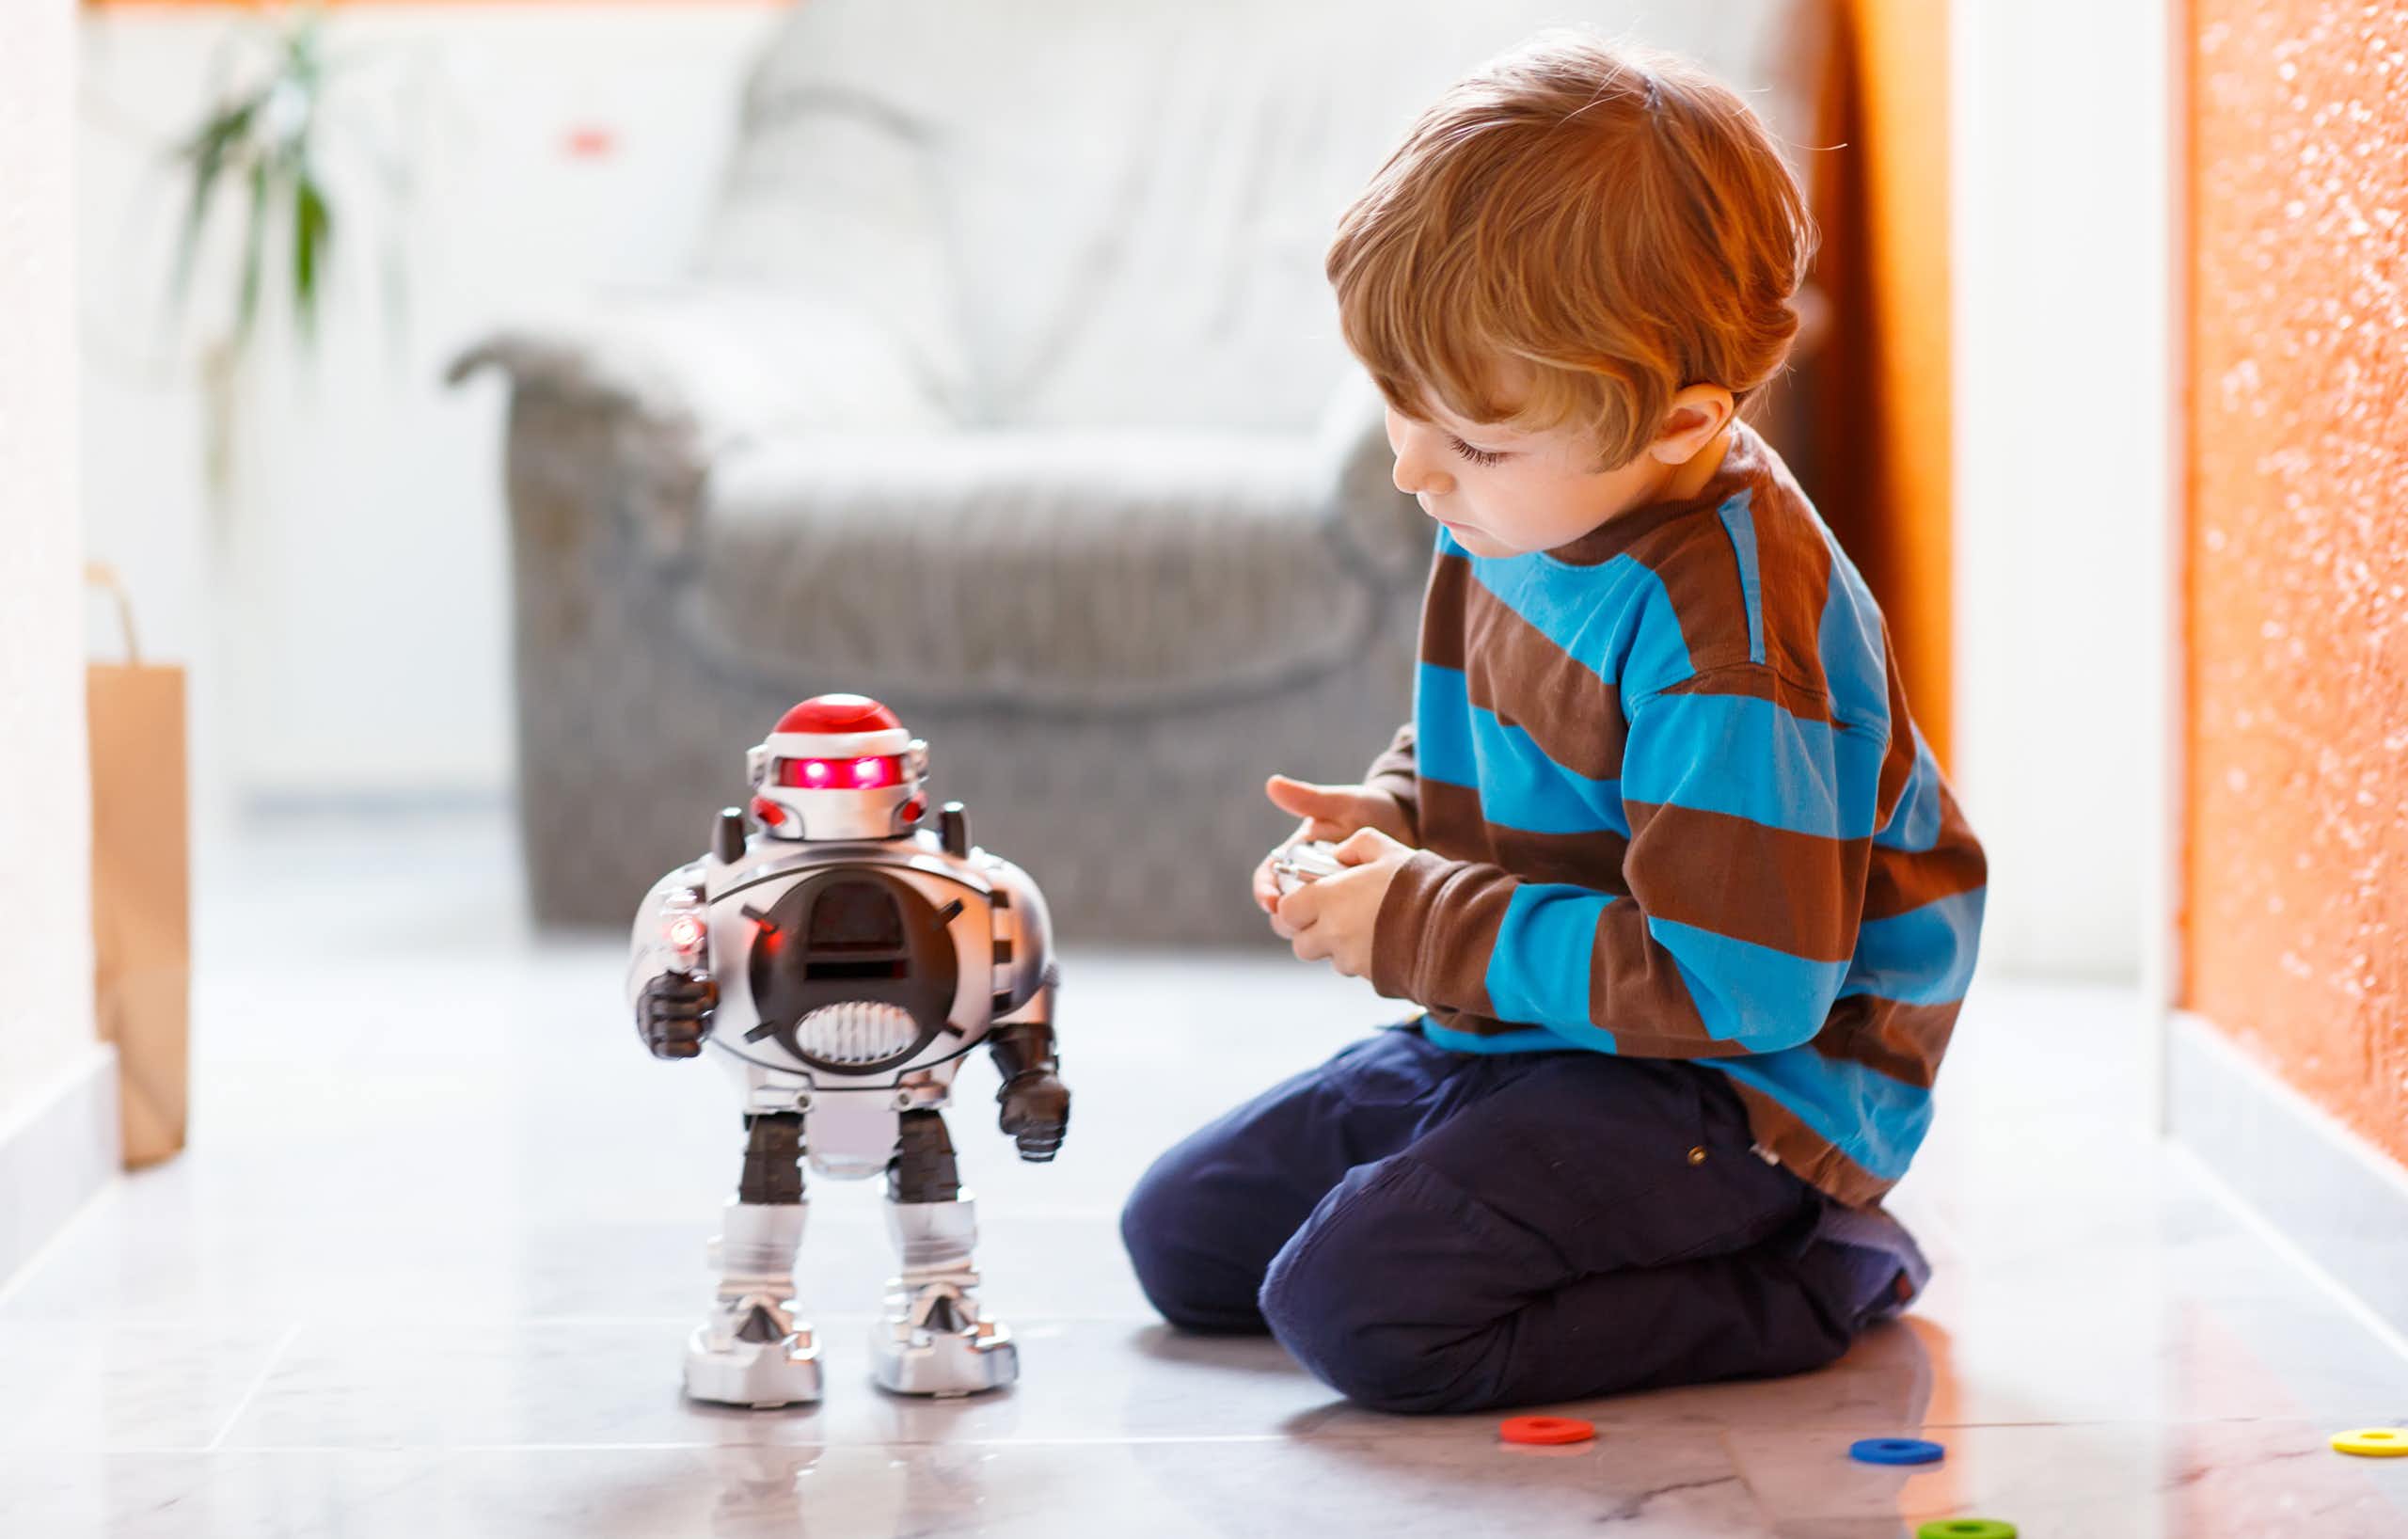 A child sitting on the floor with a robot toy.